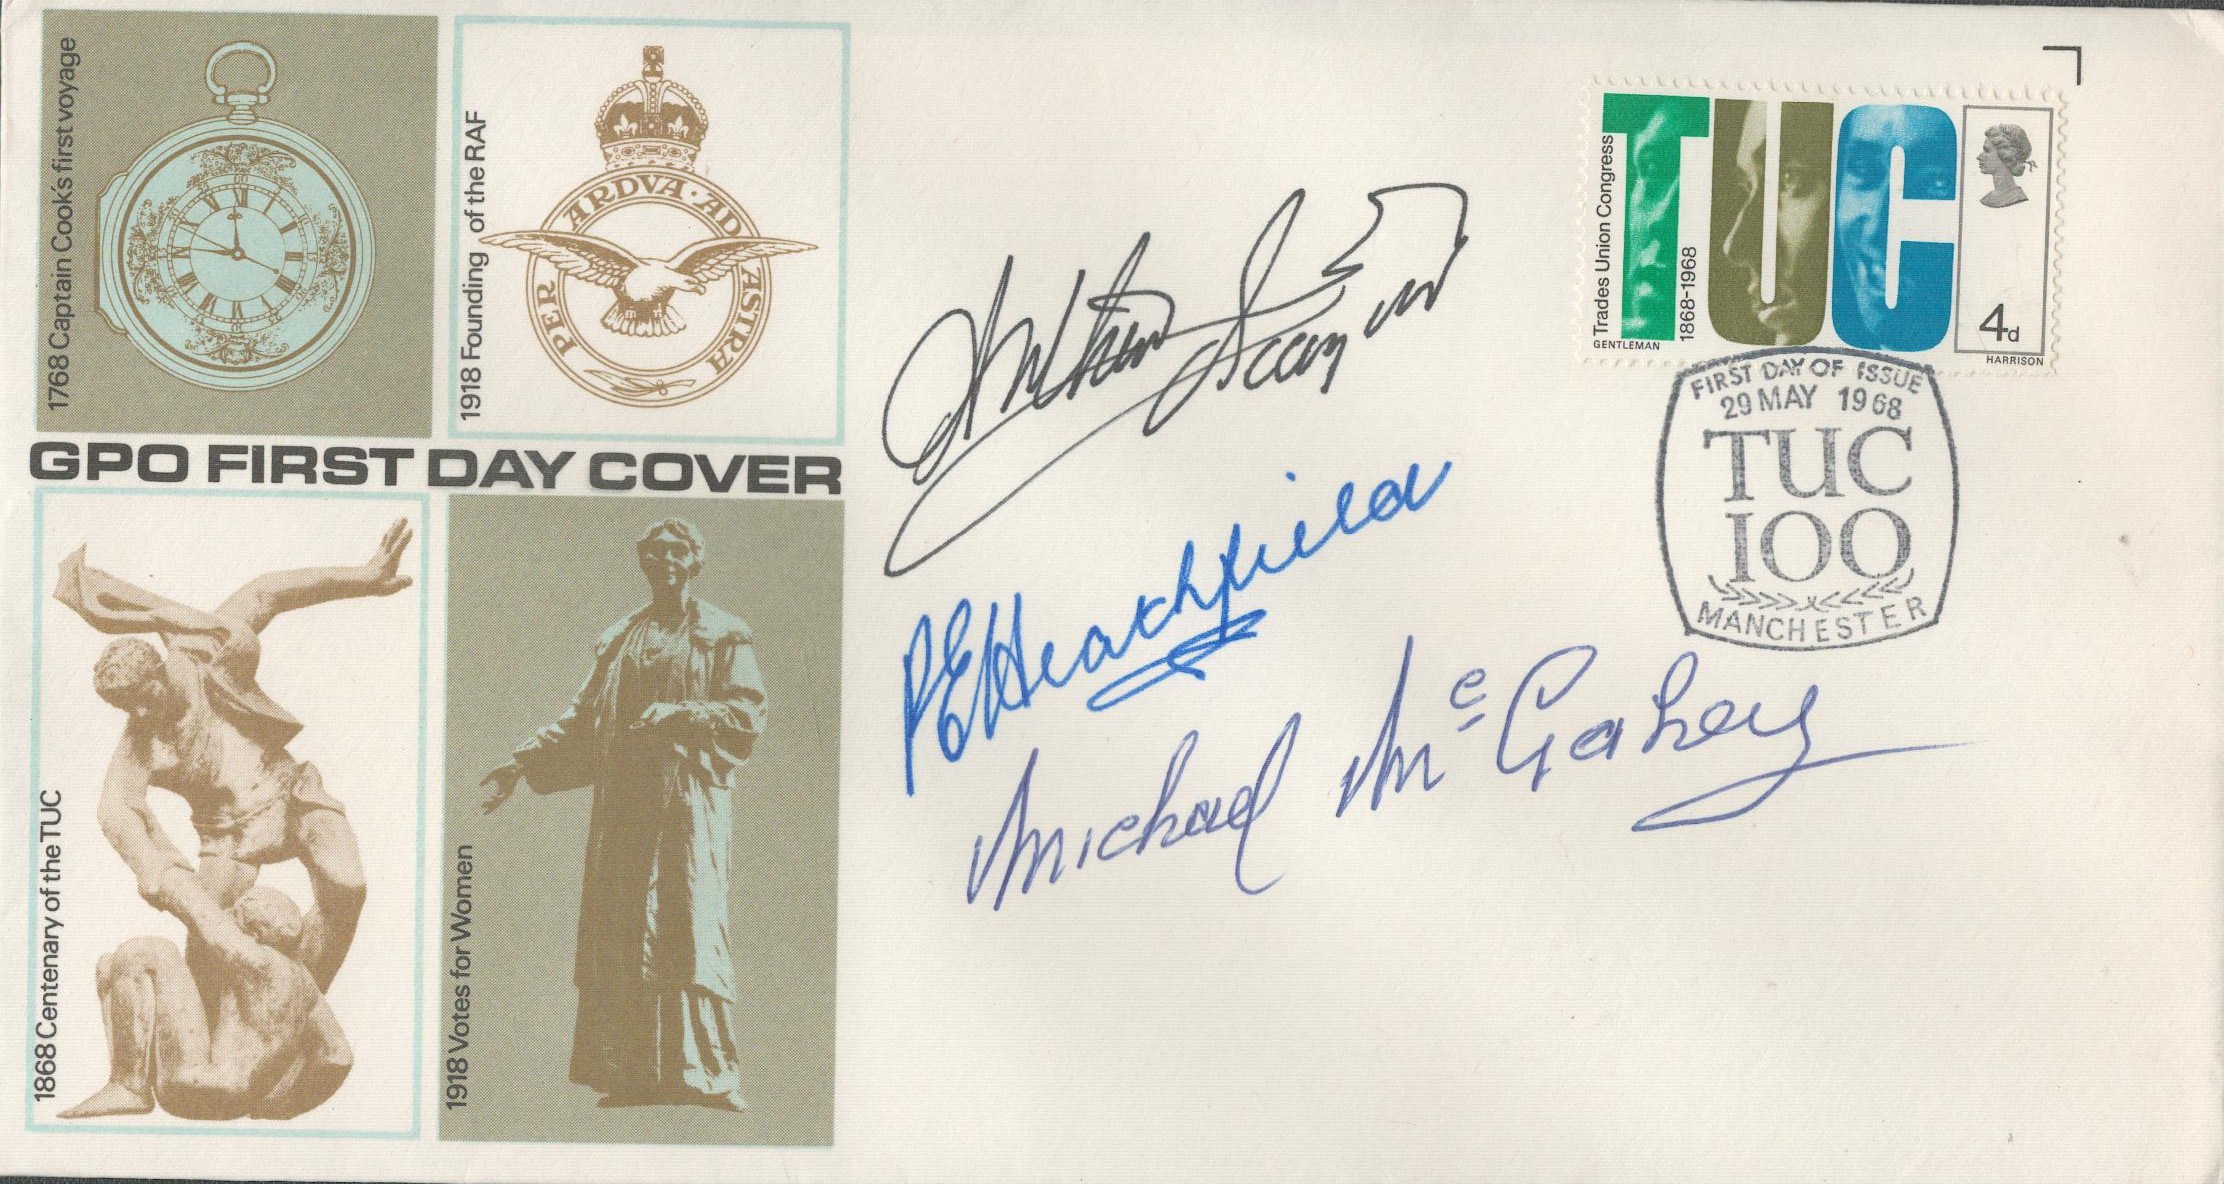 Arthur Scargill, Peter Heathfield and Mick McGahey signed cover. Good Condition. All autographs